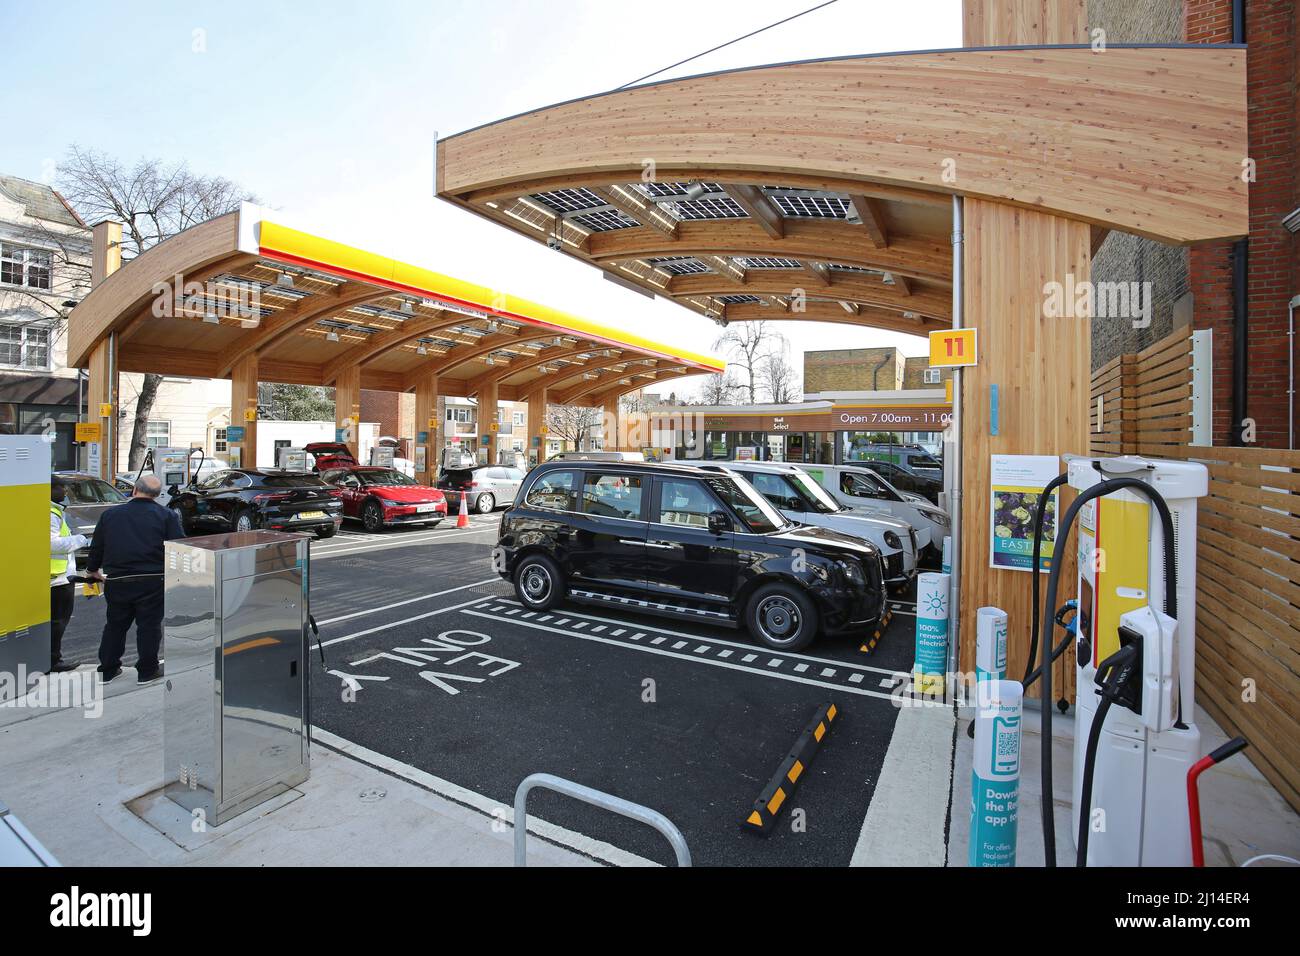 Oil company Shell's new Recharge Station on Fulham Road, west London, UK. The busy garage forecourt provides only electric charging. Stock Photo